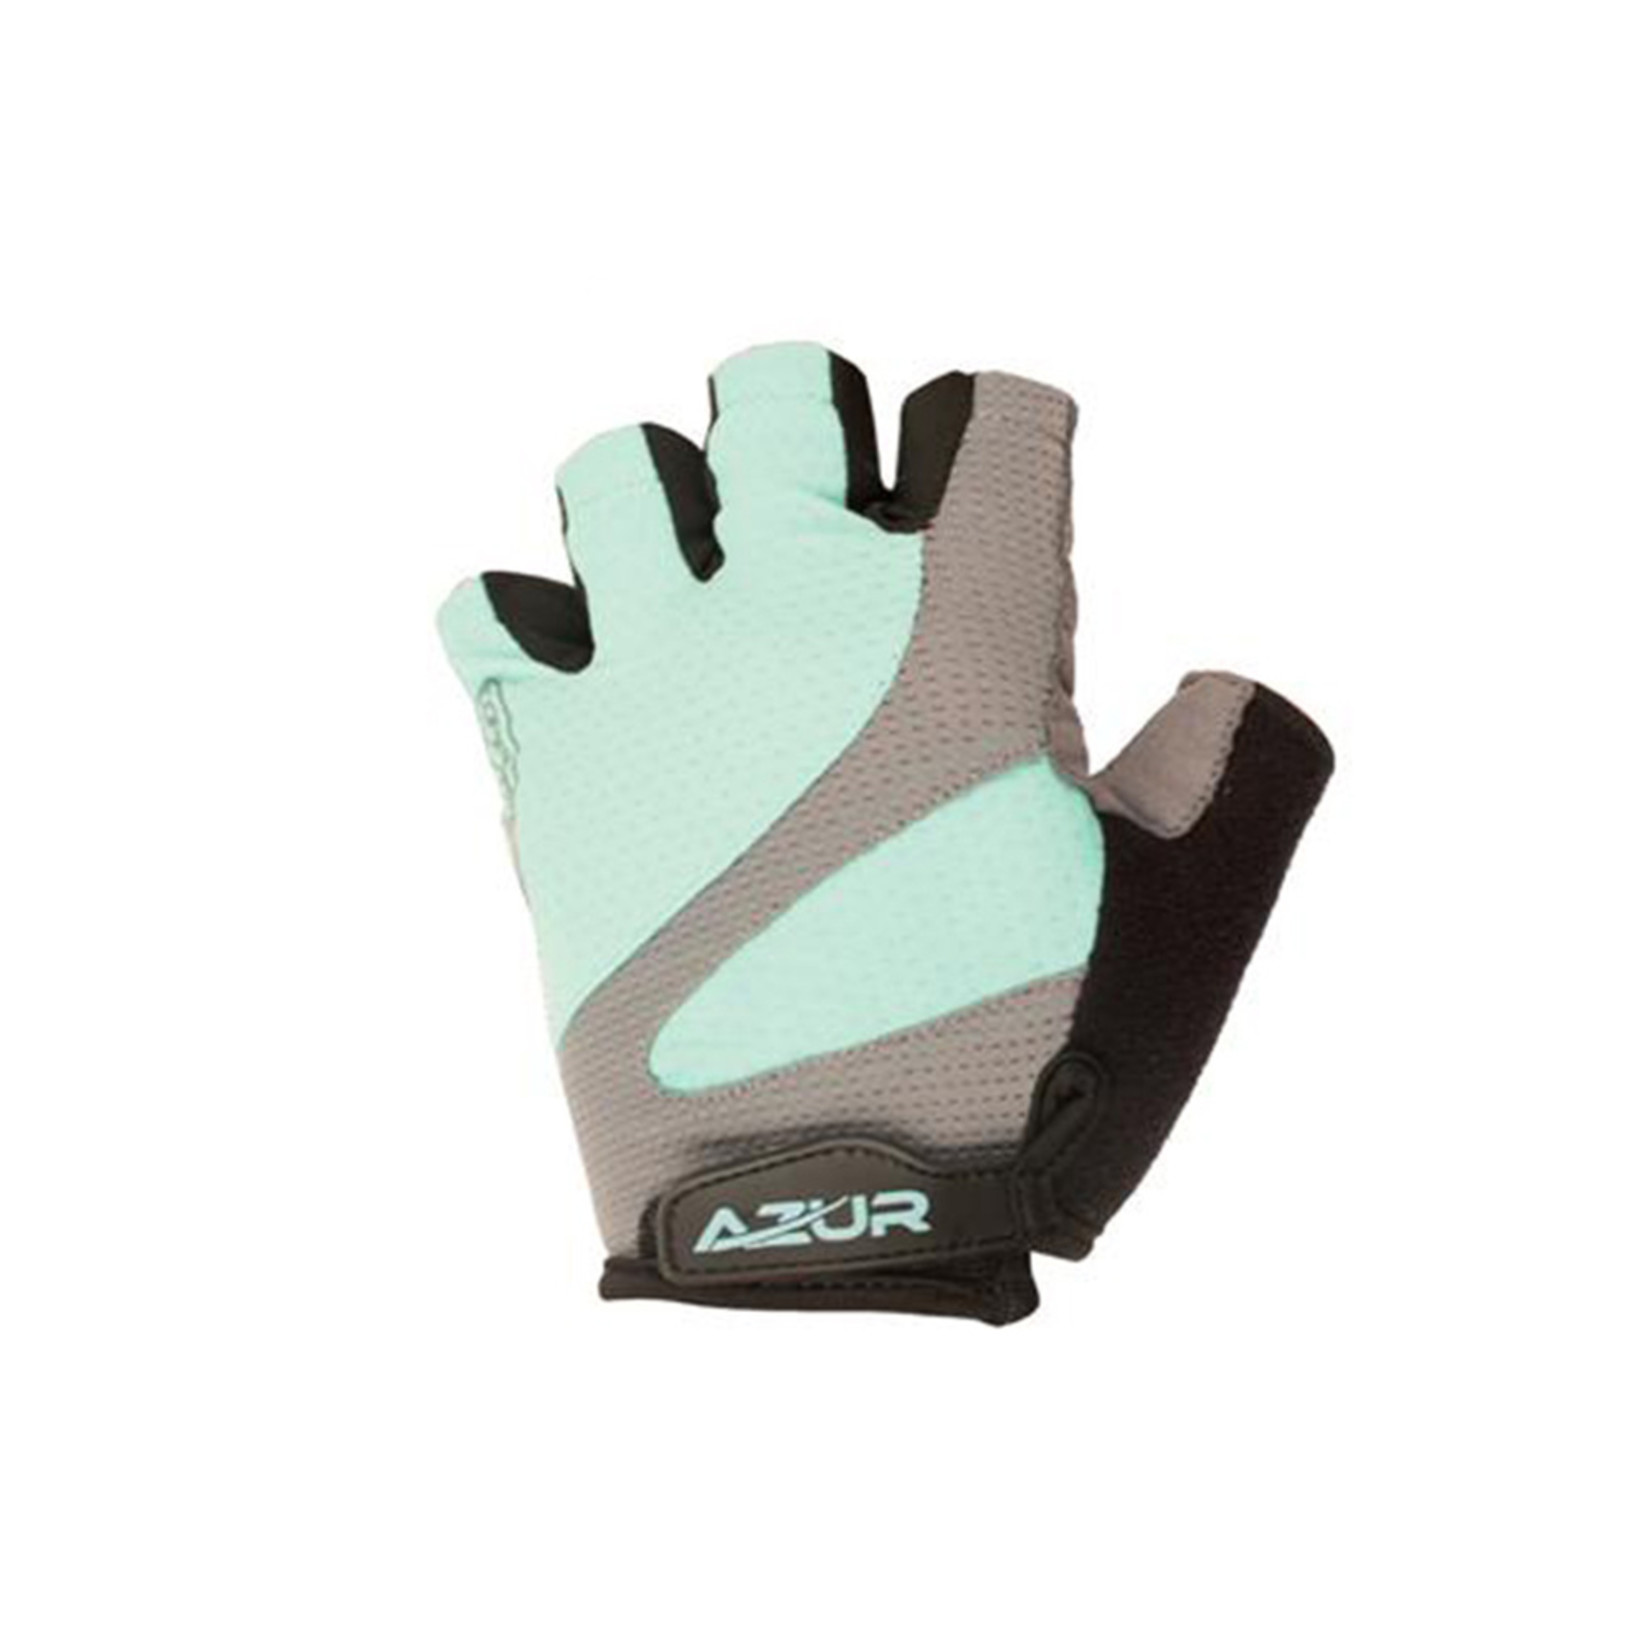 Azur Azur Bike/Cycling Glove - Synthetic Palm - S60 Series - Mint - X Large